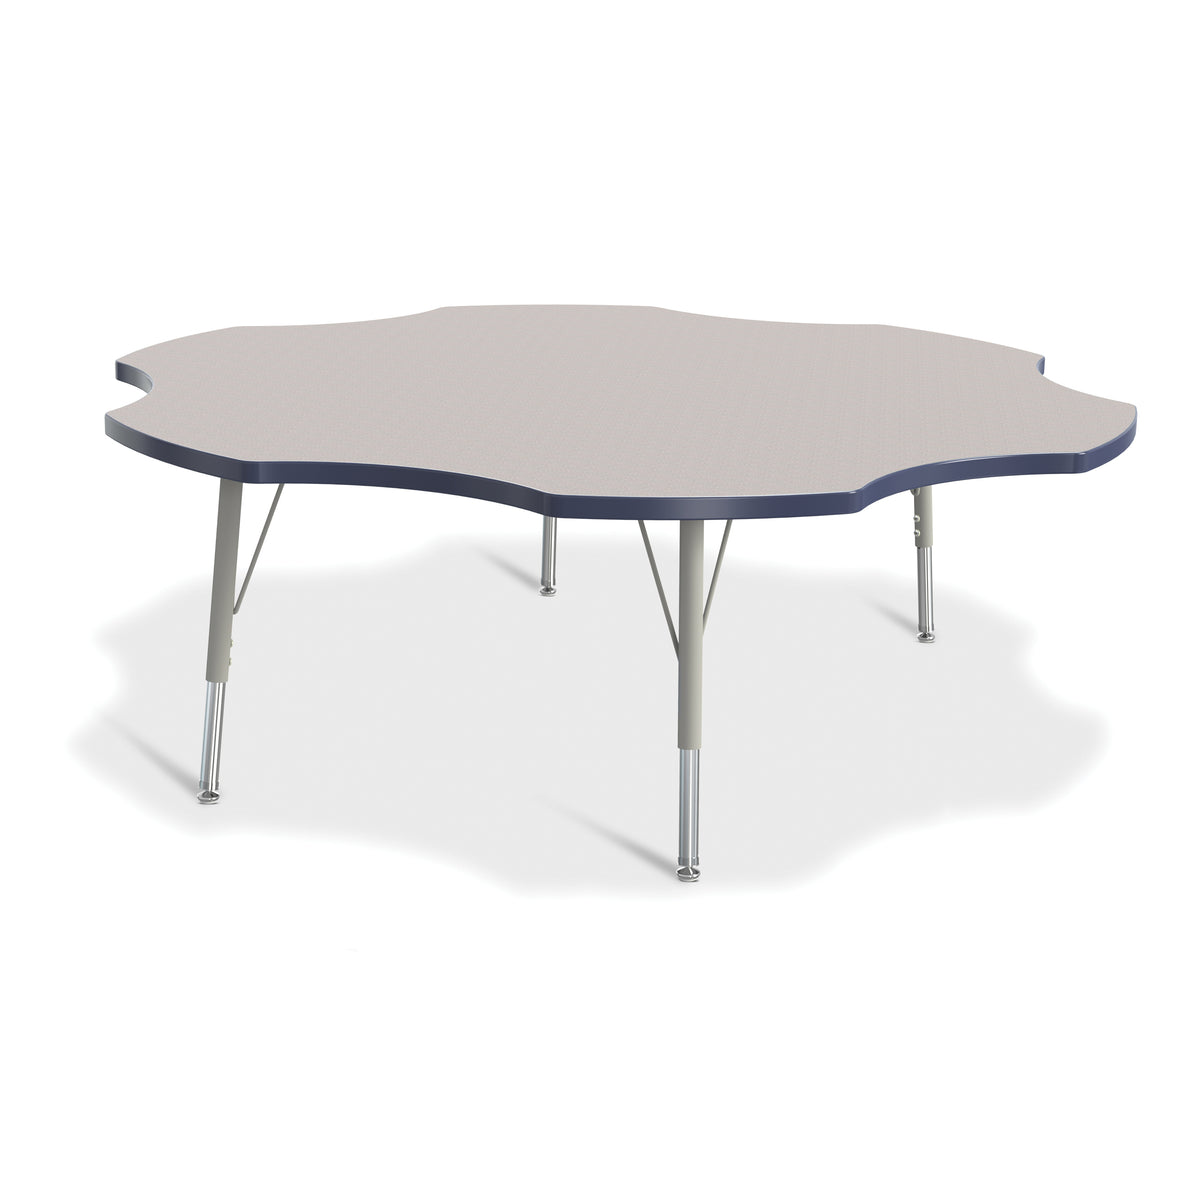 6458JCE112, Berries Six Leaf Activity Table - 60", E-height - Freckled Gray/Navy/Gray